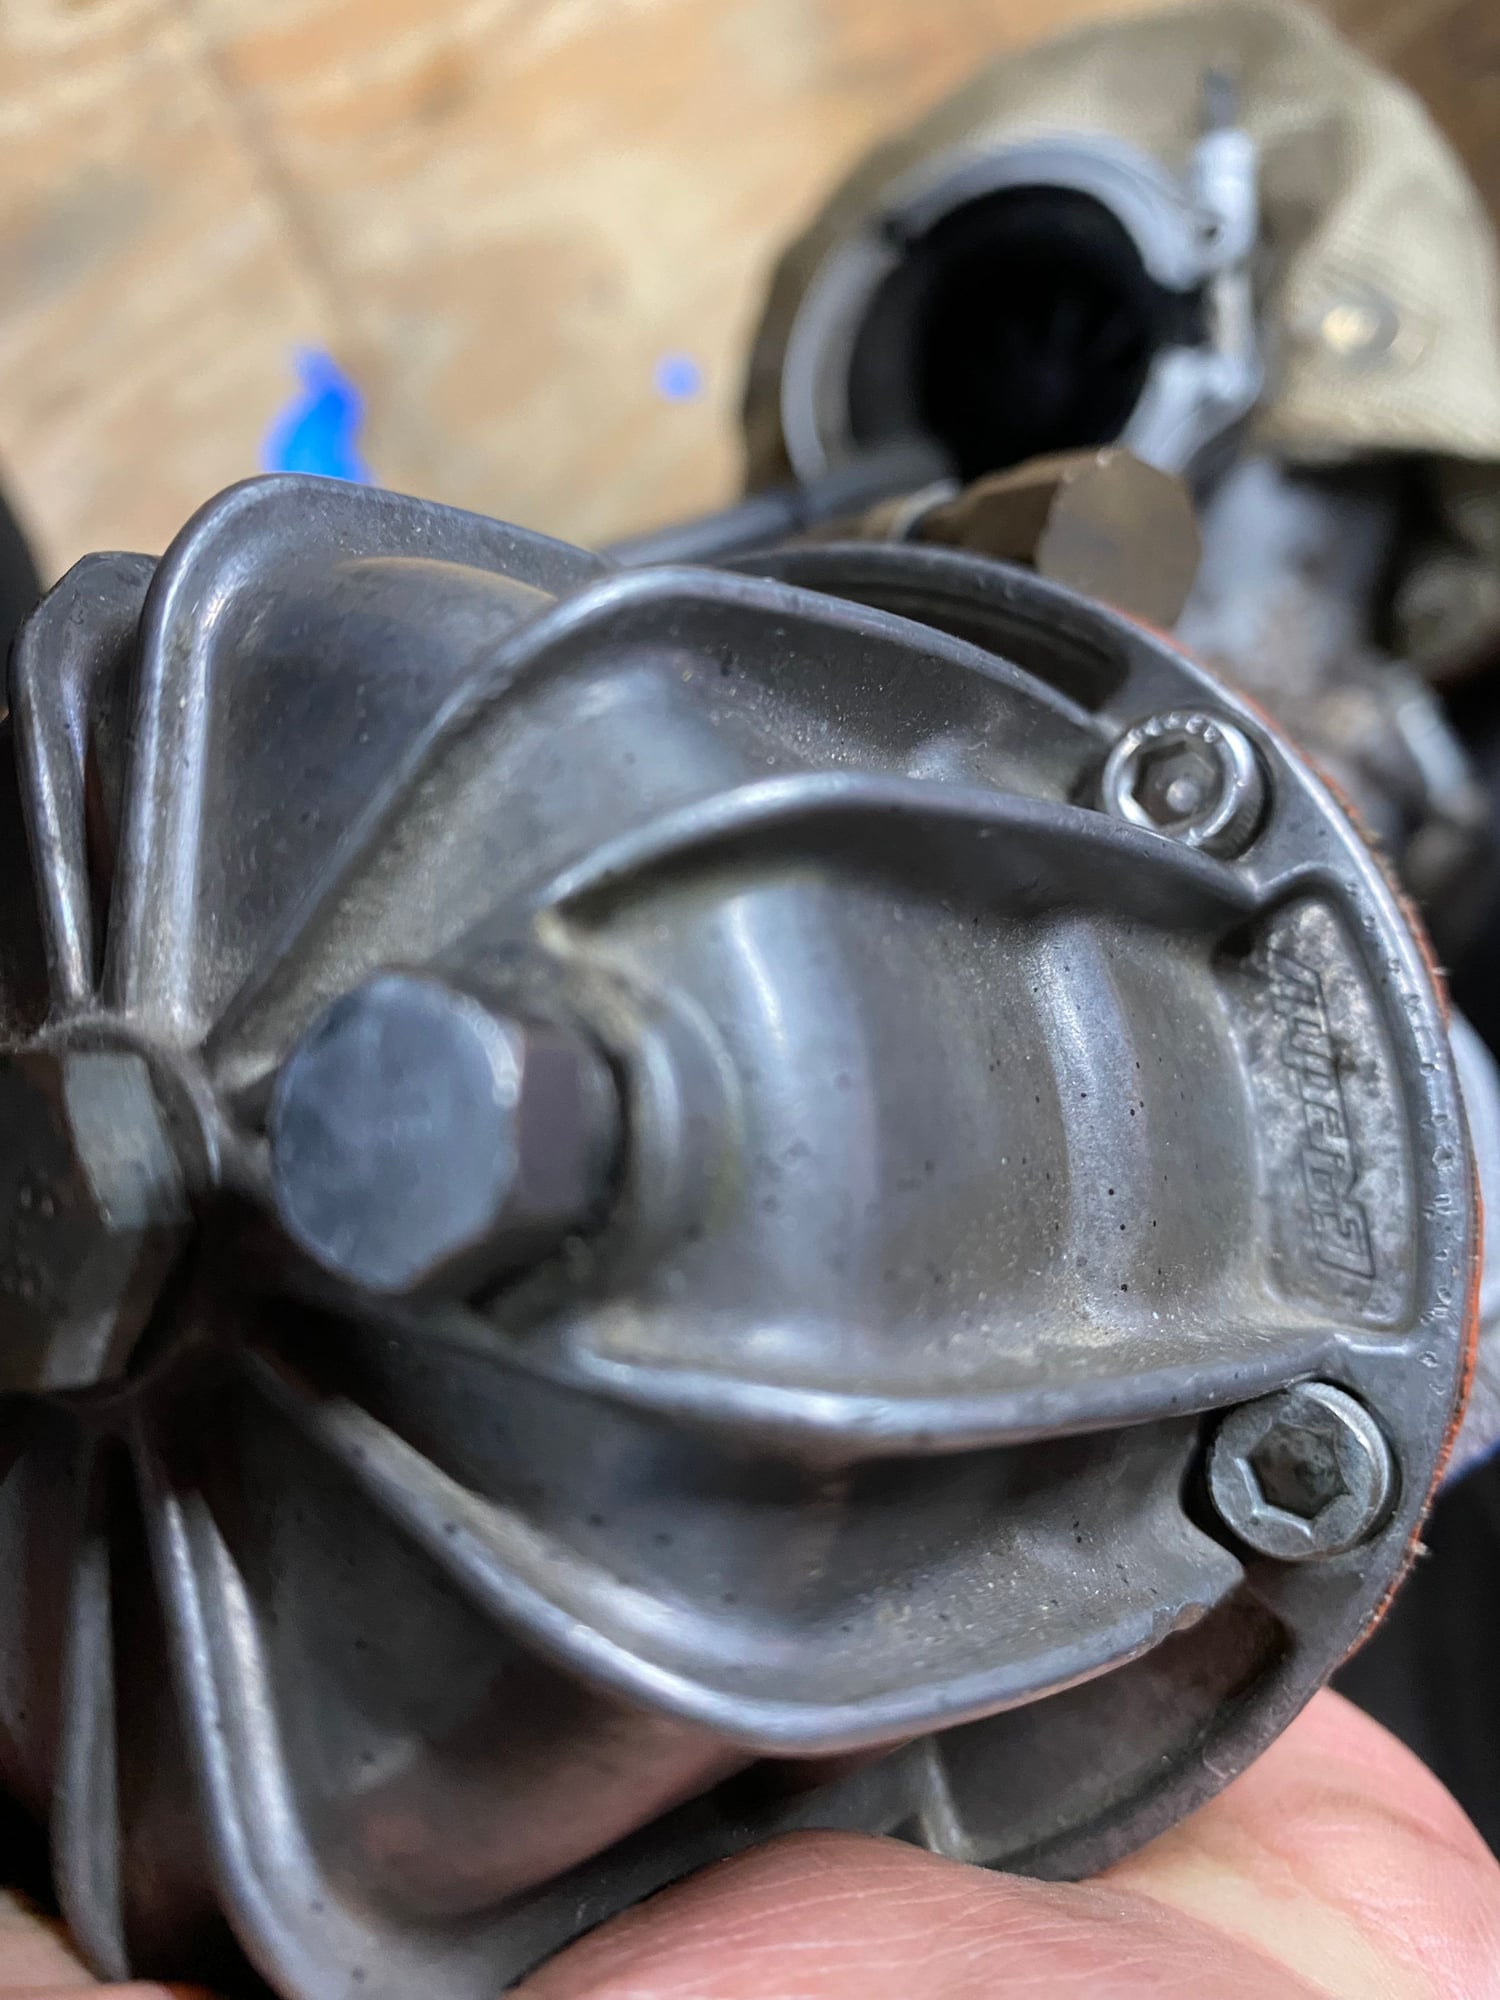 Engine - Power Adders - Comp Turbo with Greedy Wastegate and Greddy Manifold Excellent Condition. - Used - 1987 to 1991 Mazda RX-7 - Prince Frederick, MD 20678, United States